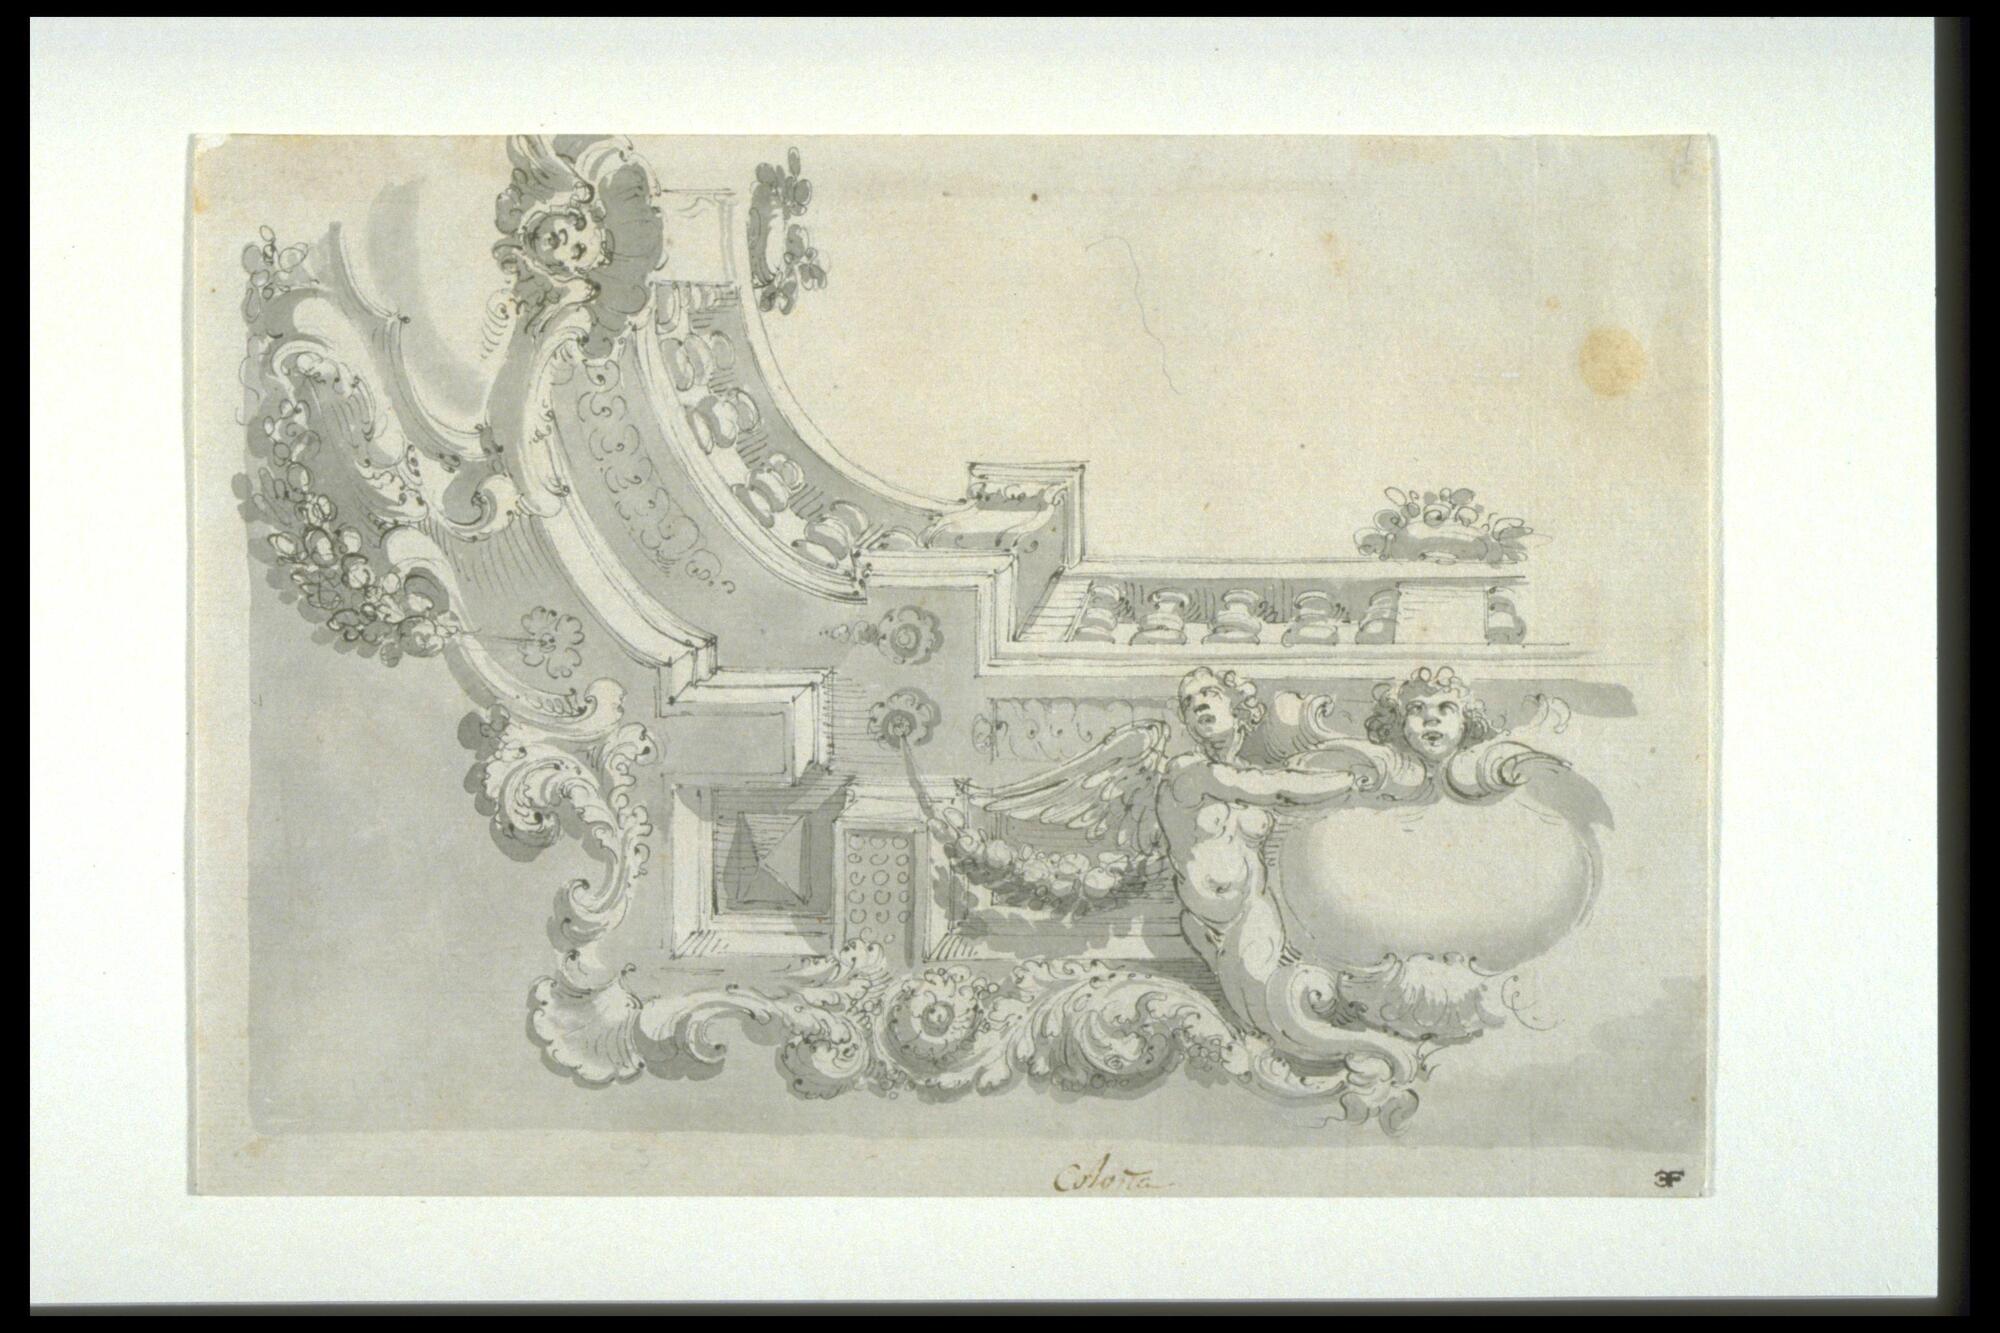 Seen from below, the drawing shows an illusionistic painted corner of a ceiling.  A balustrade below which are architectural details including putti, swags, and acanthus leaves.